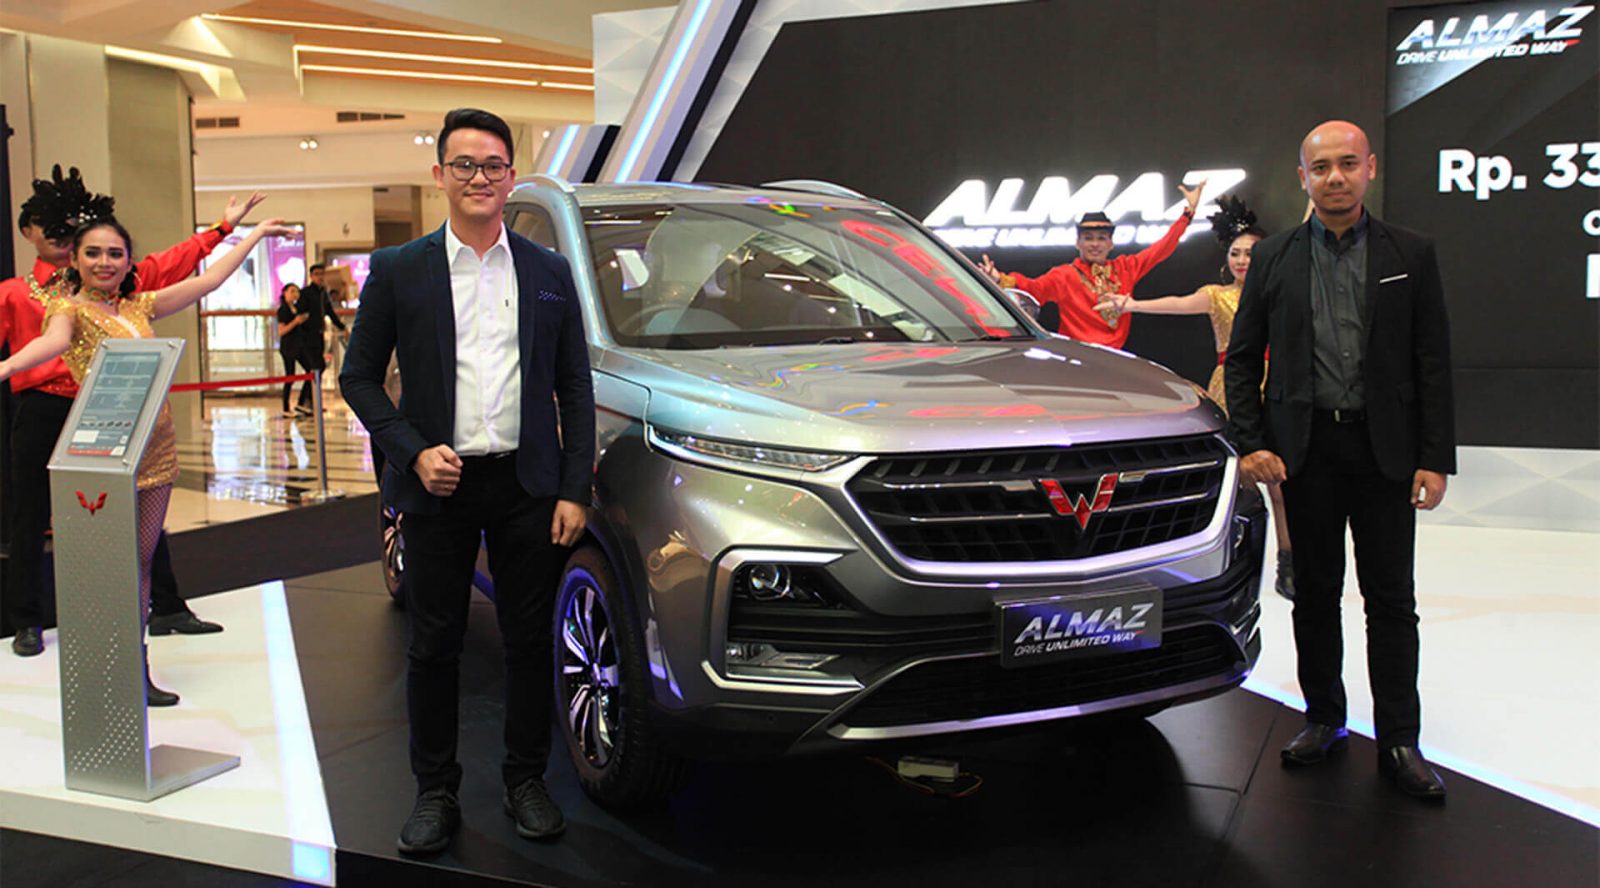 Image Wuling Almaz is Officially Introduced in Medan